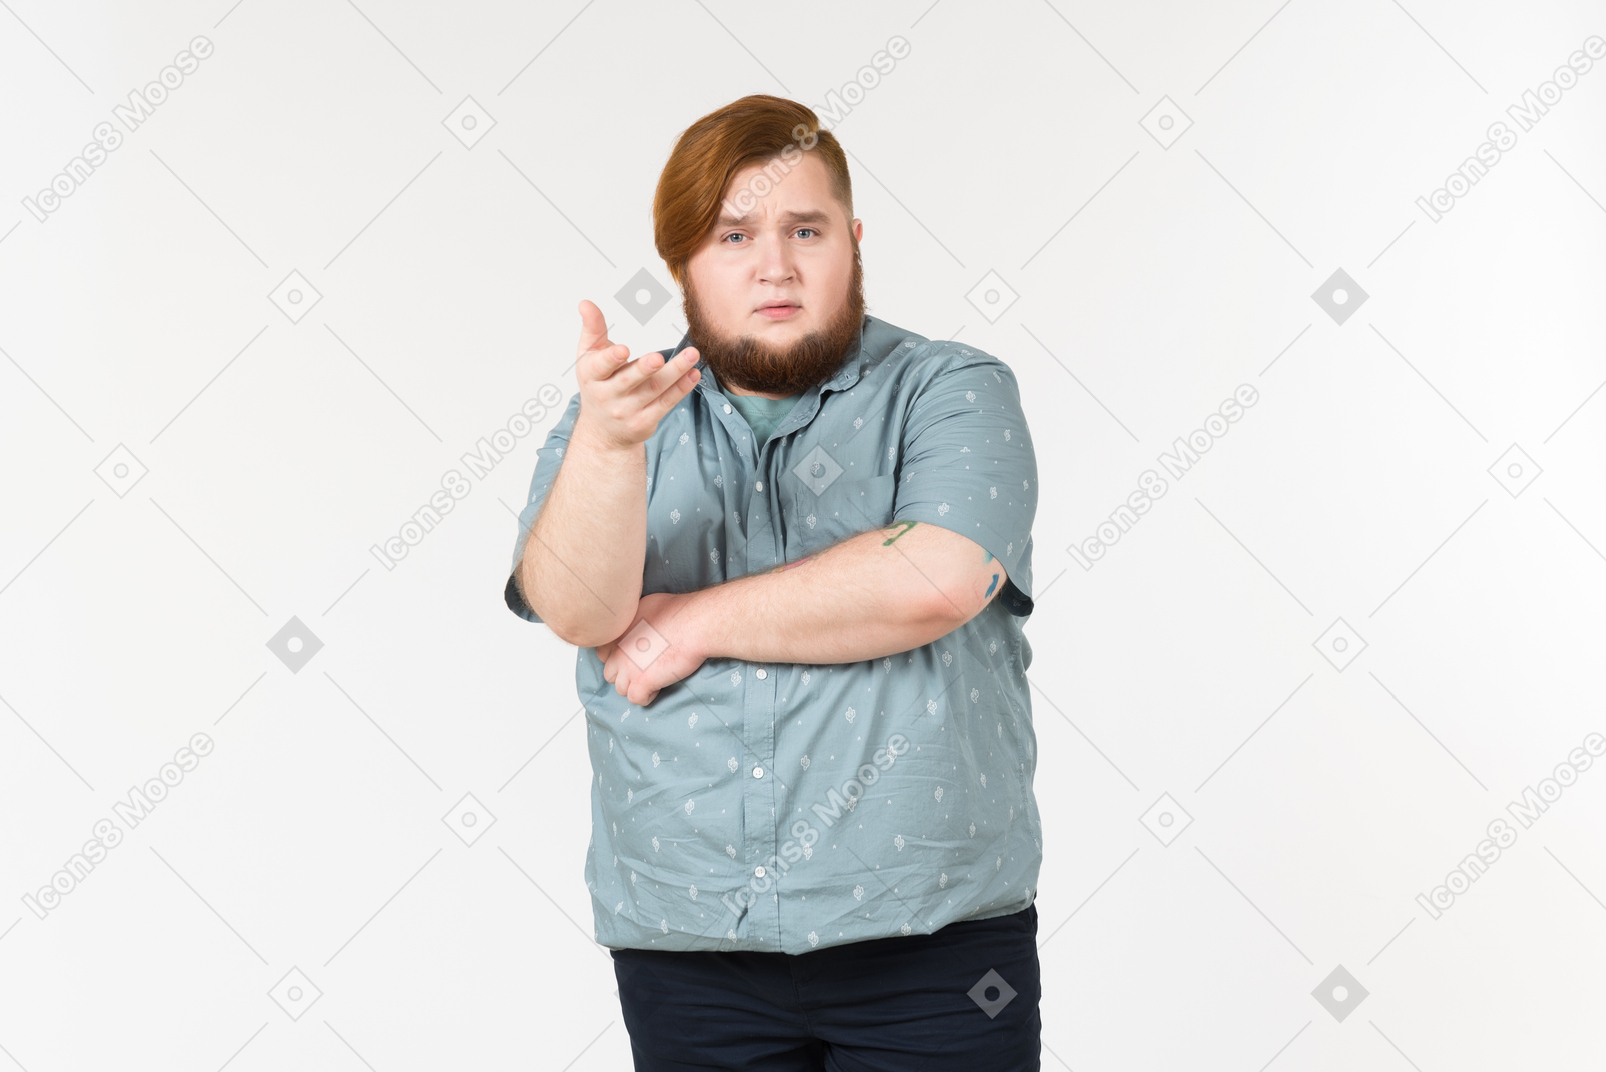 Pensive looking young overweight man standing with his hands crossed